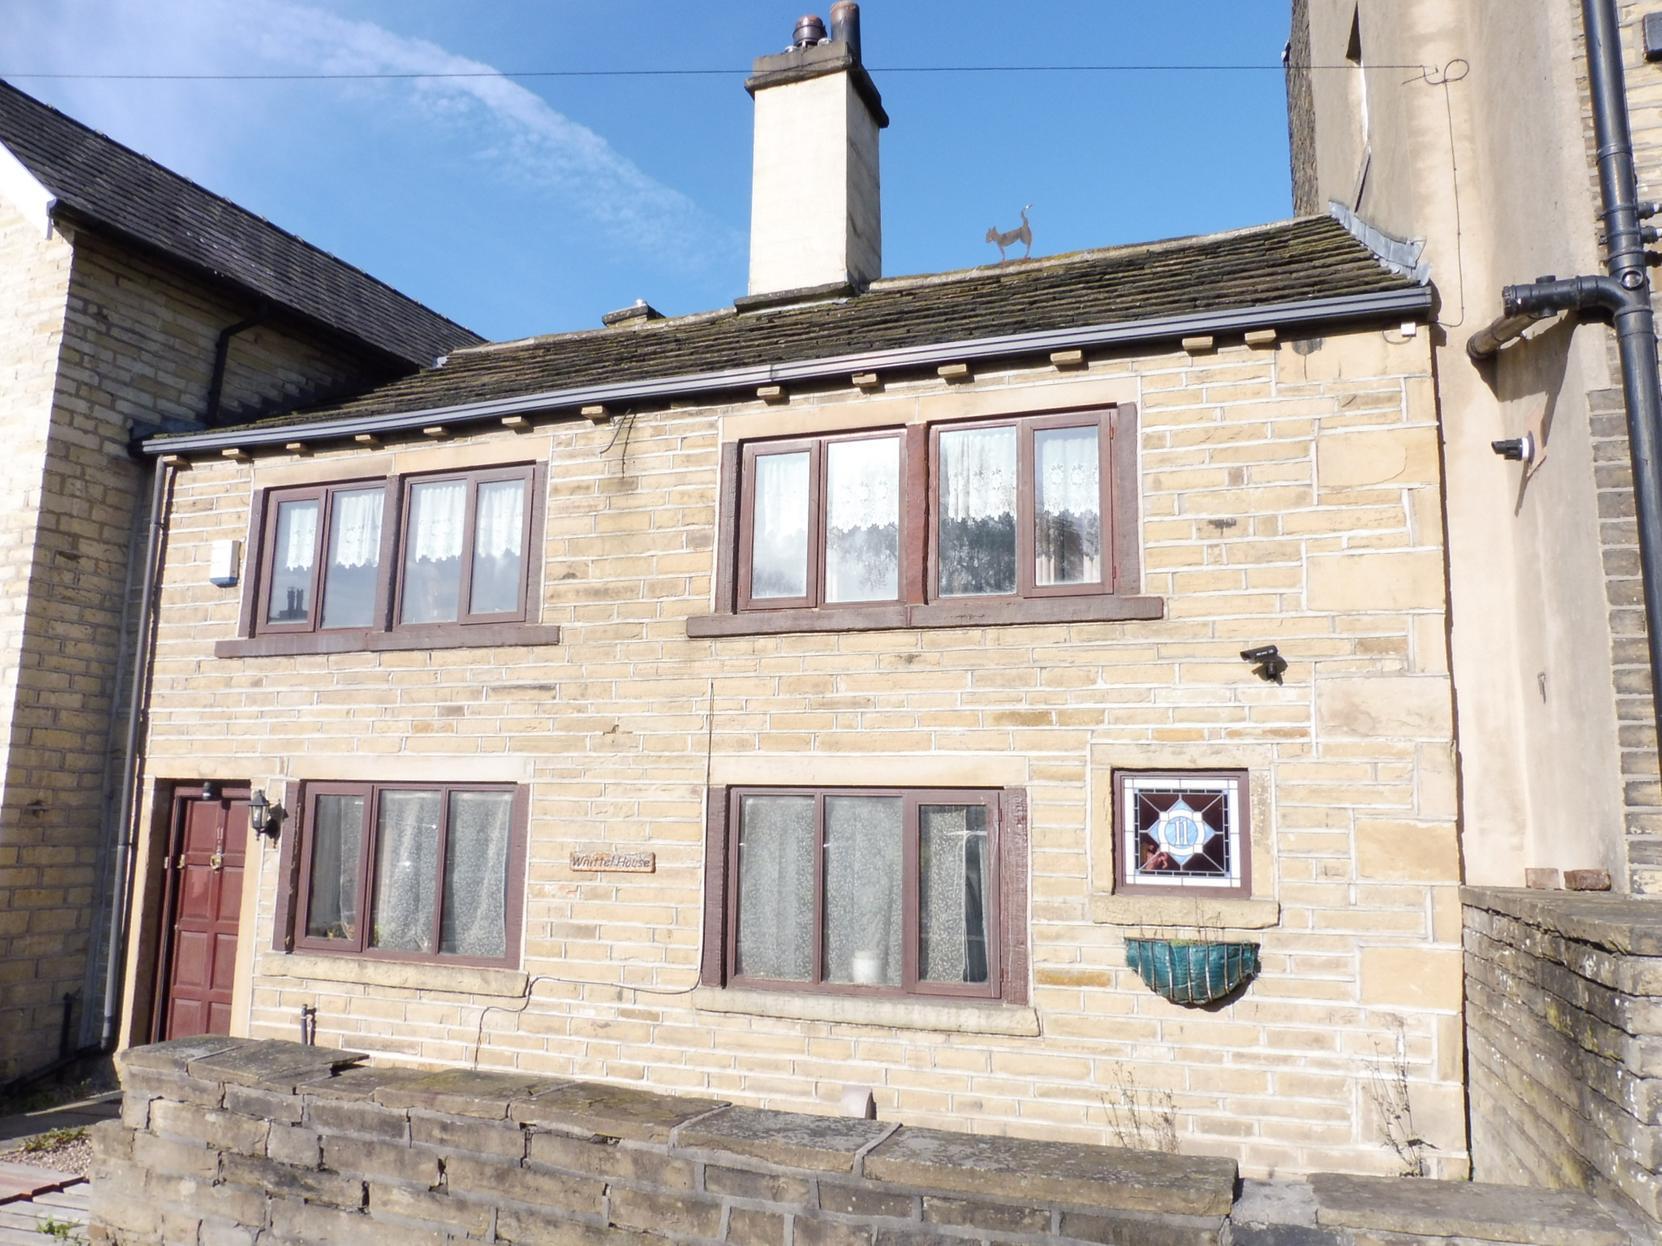 This charming, characterful, three bedroom cottage in Elland would make the ideal renovation property project with plenty of potential to improve.
Estate Agent: William H Brown